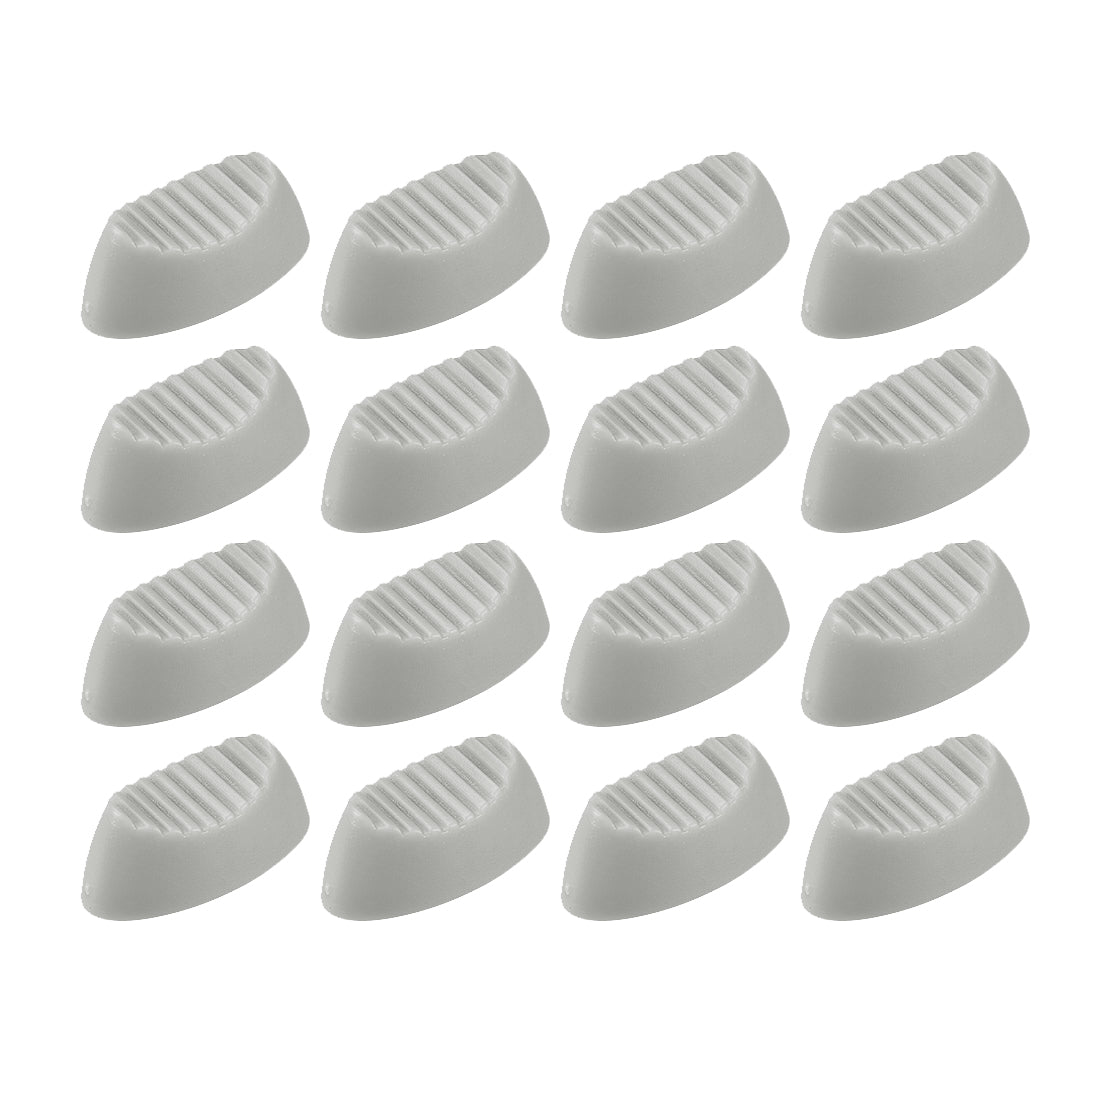 Uxcell Uxcell 24mmx12mmx11mm Console Mixer Slider Fader Knobs Replacement for Potentiometer Grey 20pcs